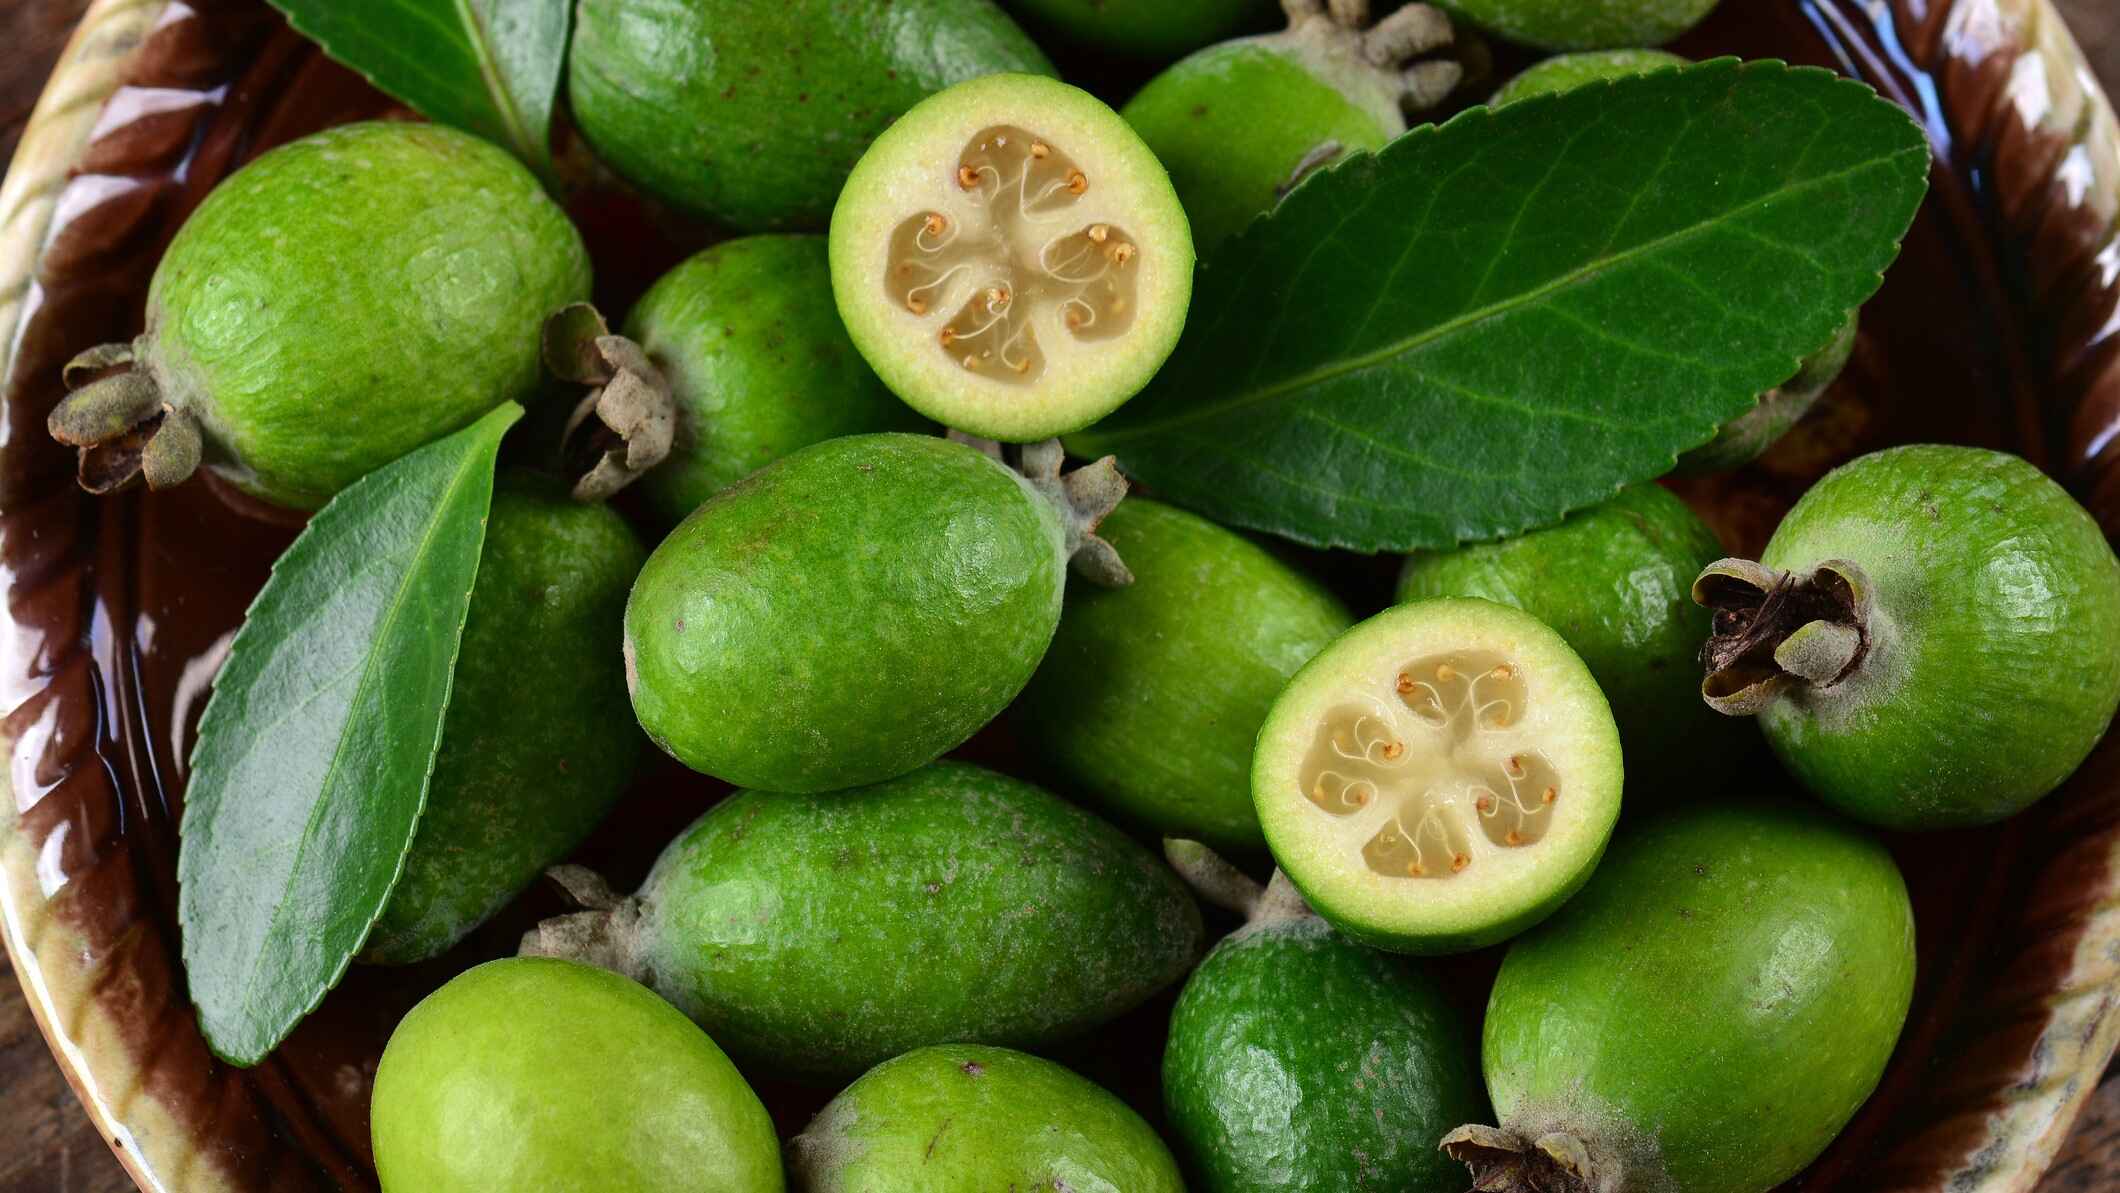 14 Facts About Feijoa - Facts.net